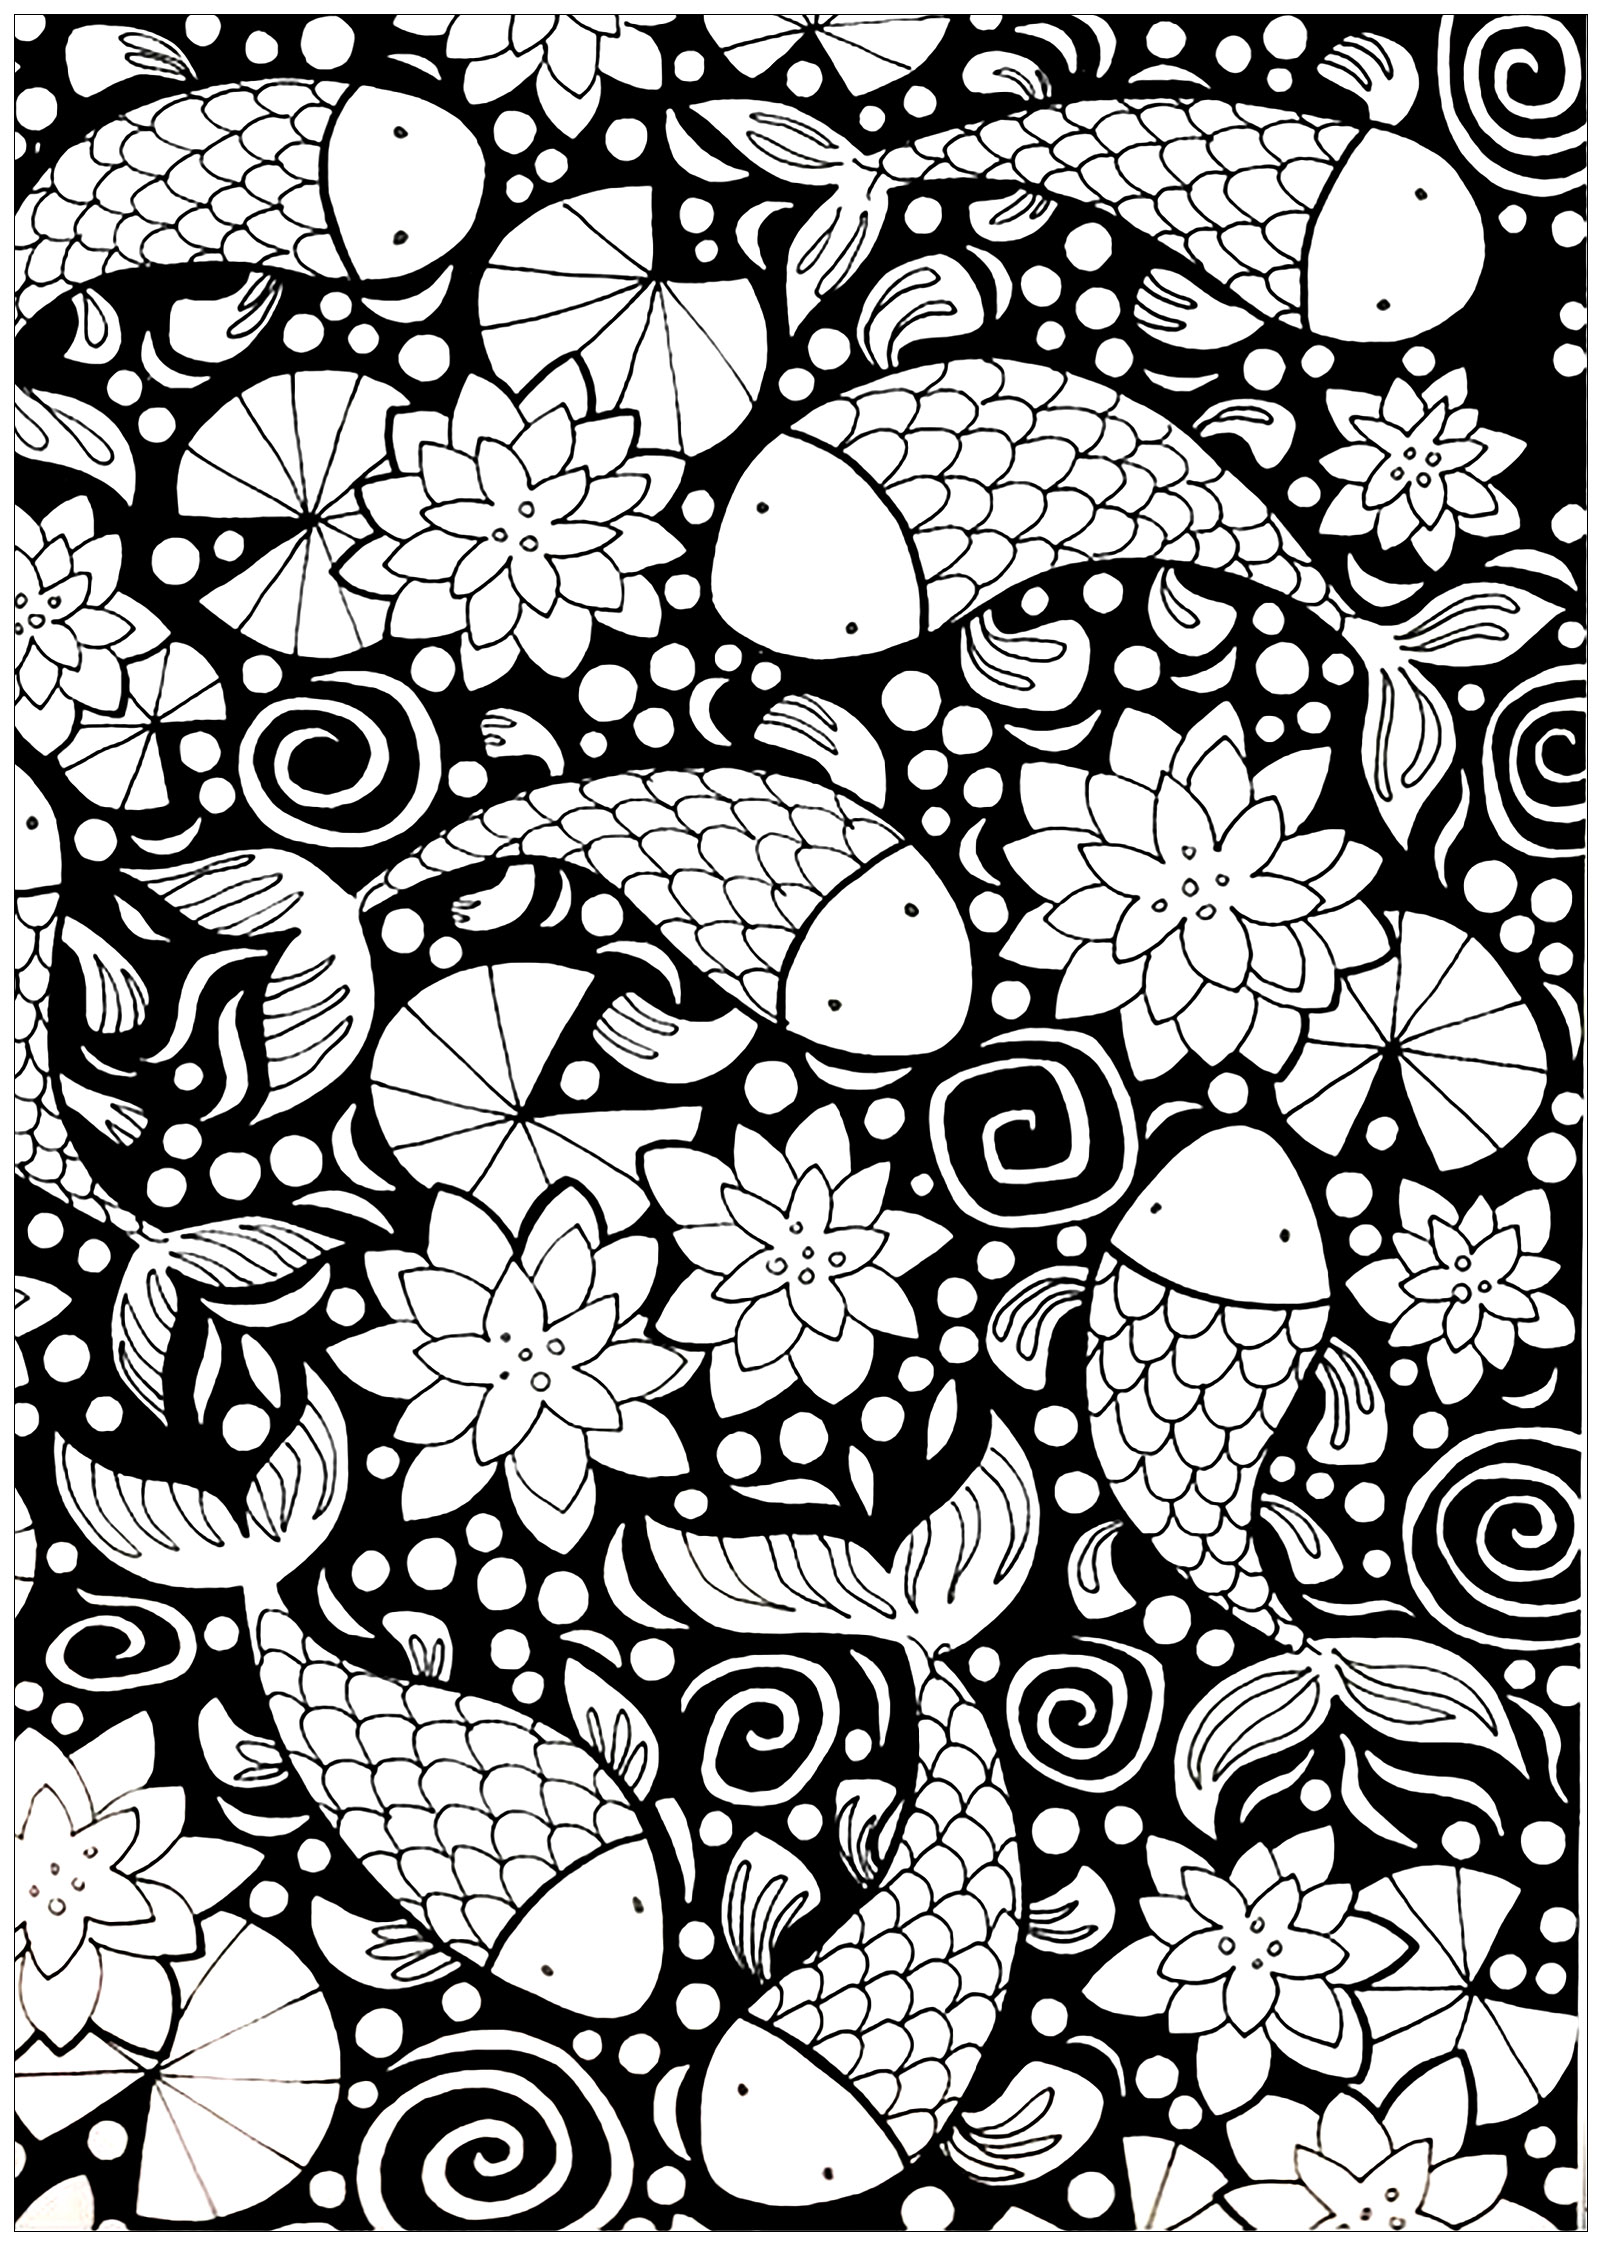 Dark background - Coloring Pages for Adults